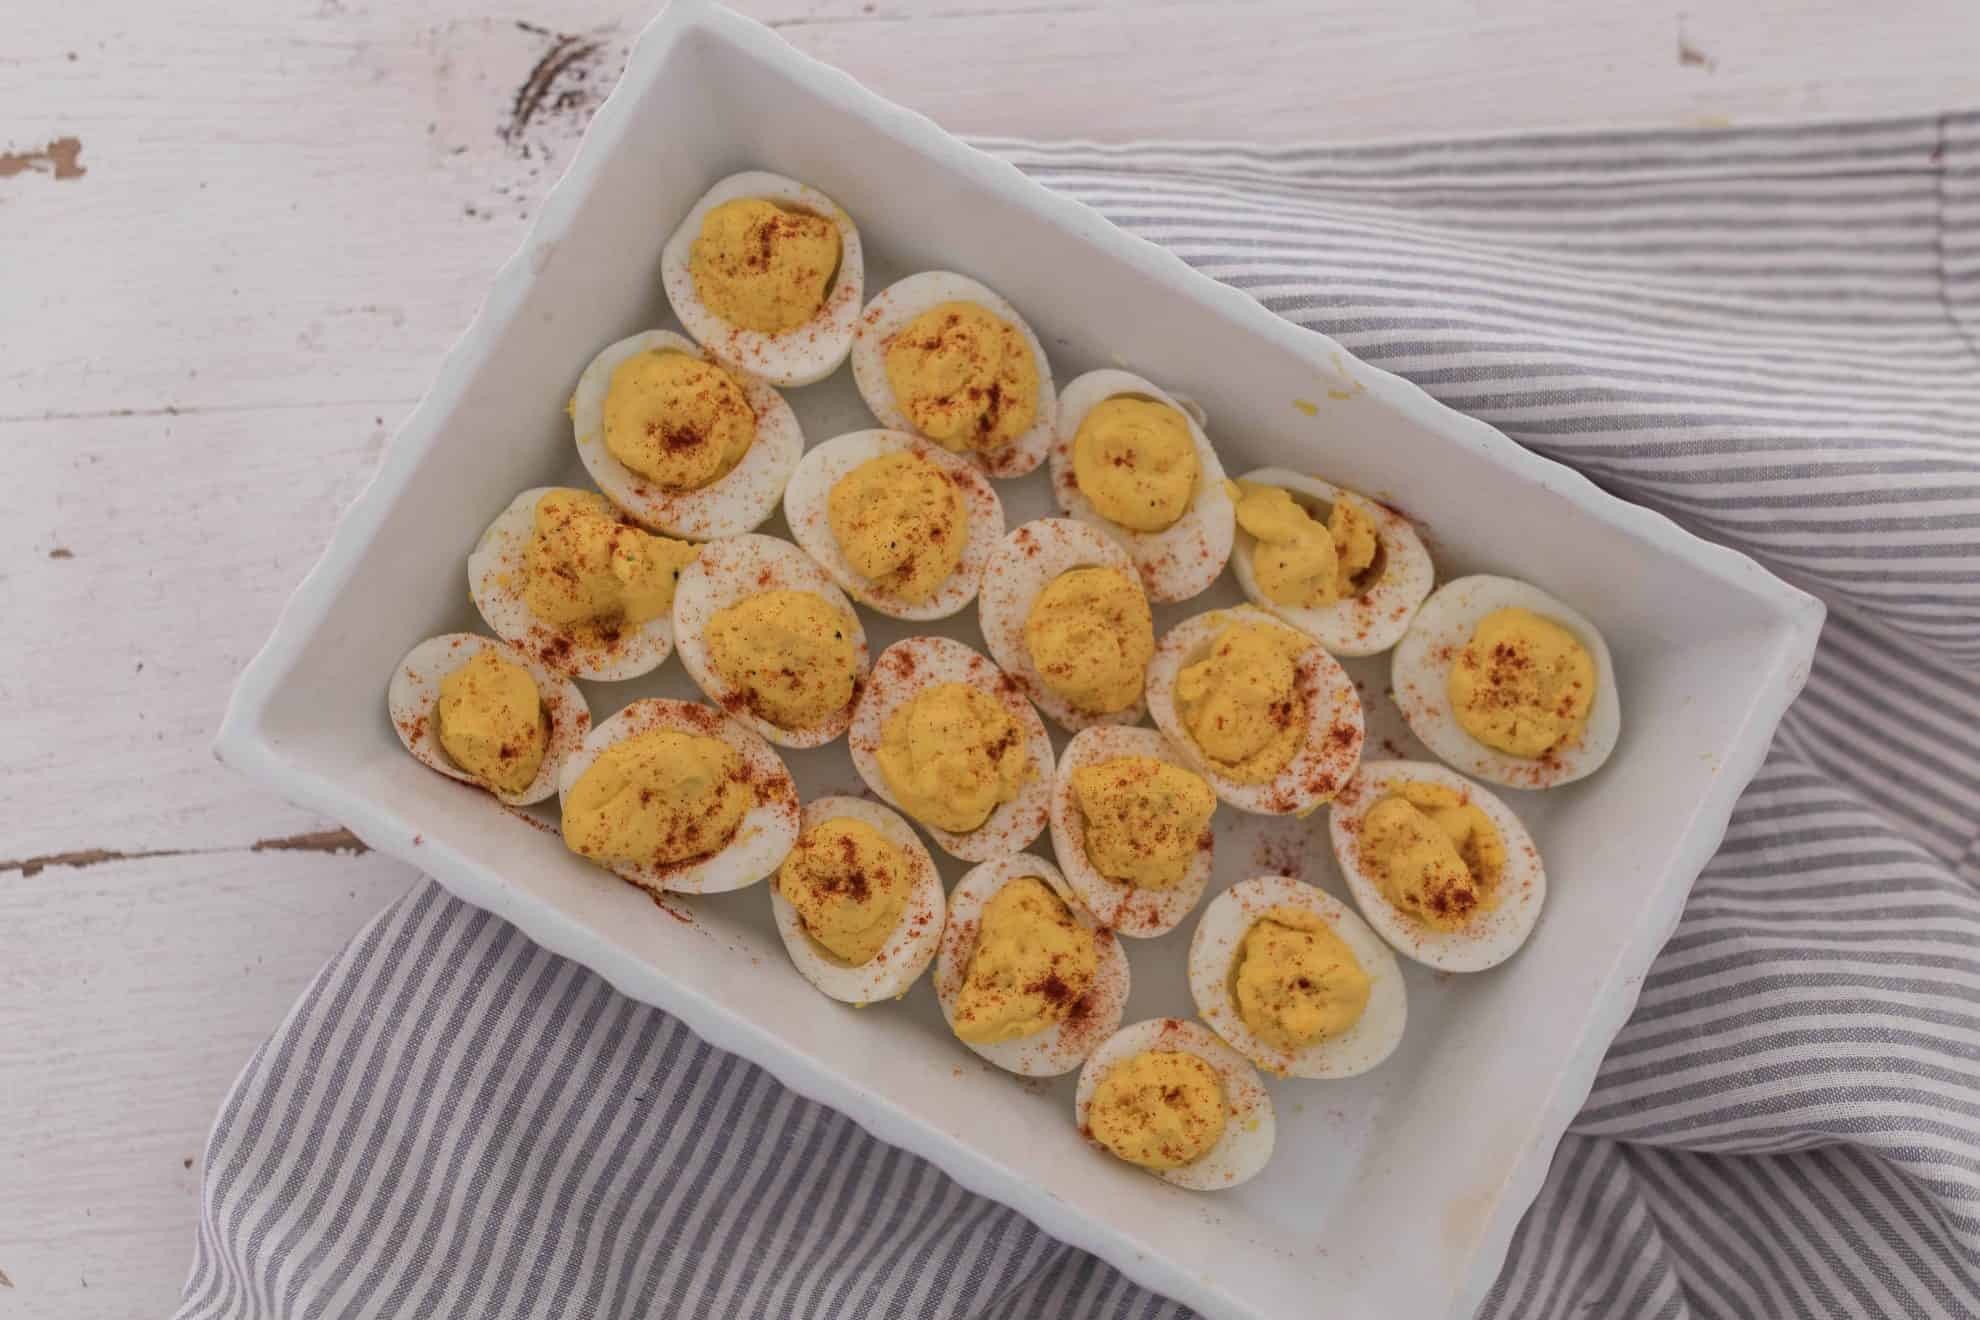 https://www.farmhouseonboone.com/wp-content/uploads/2019/04/deviled-eggs-in-the-instant-pot-1.jpg